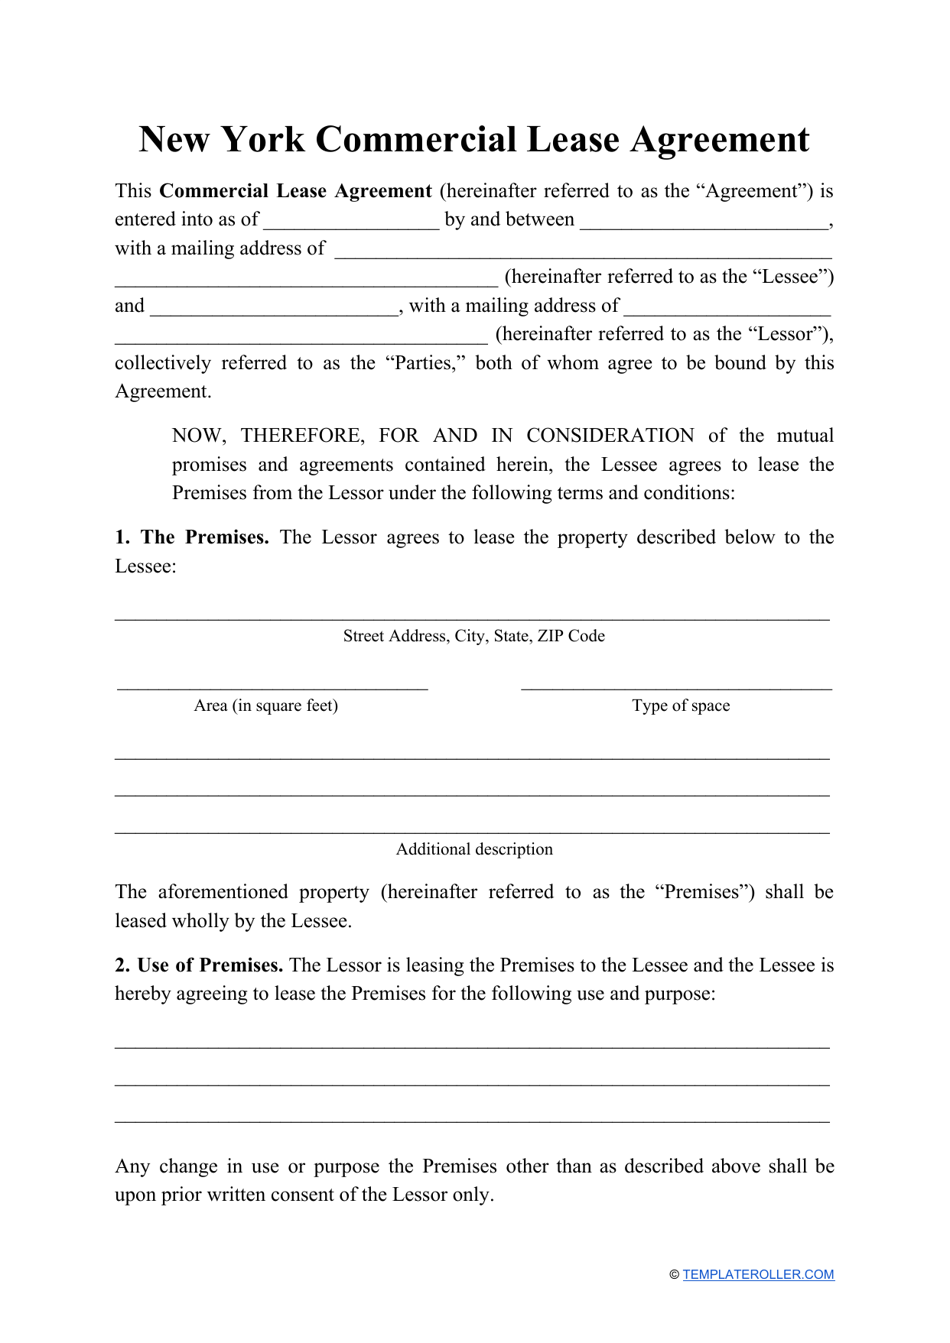 Commercial Lease Agreement Template - New York, Page 1